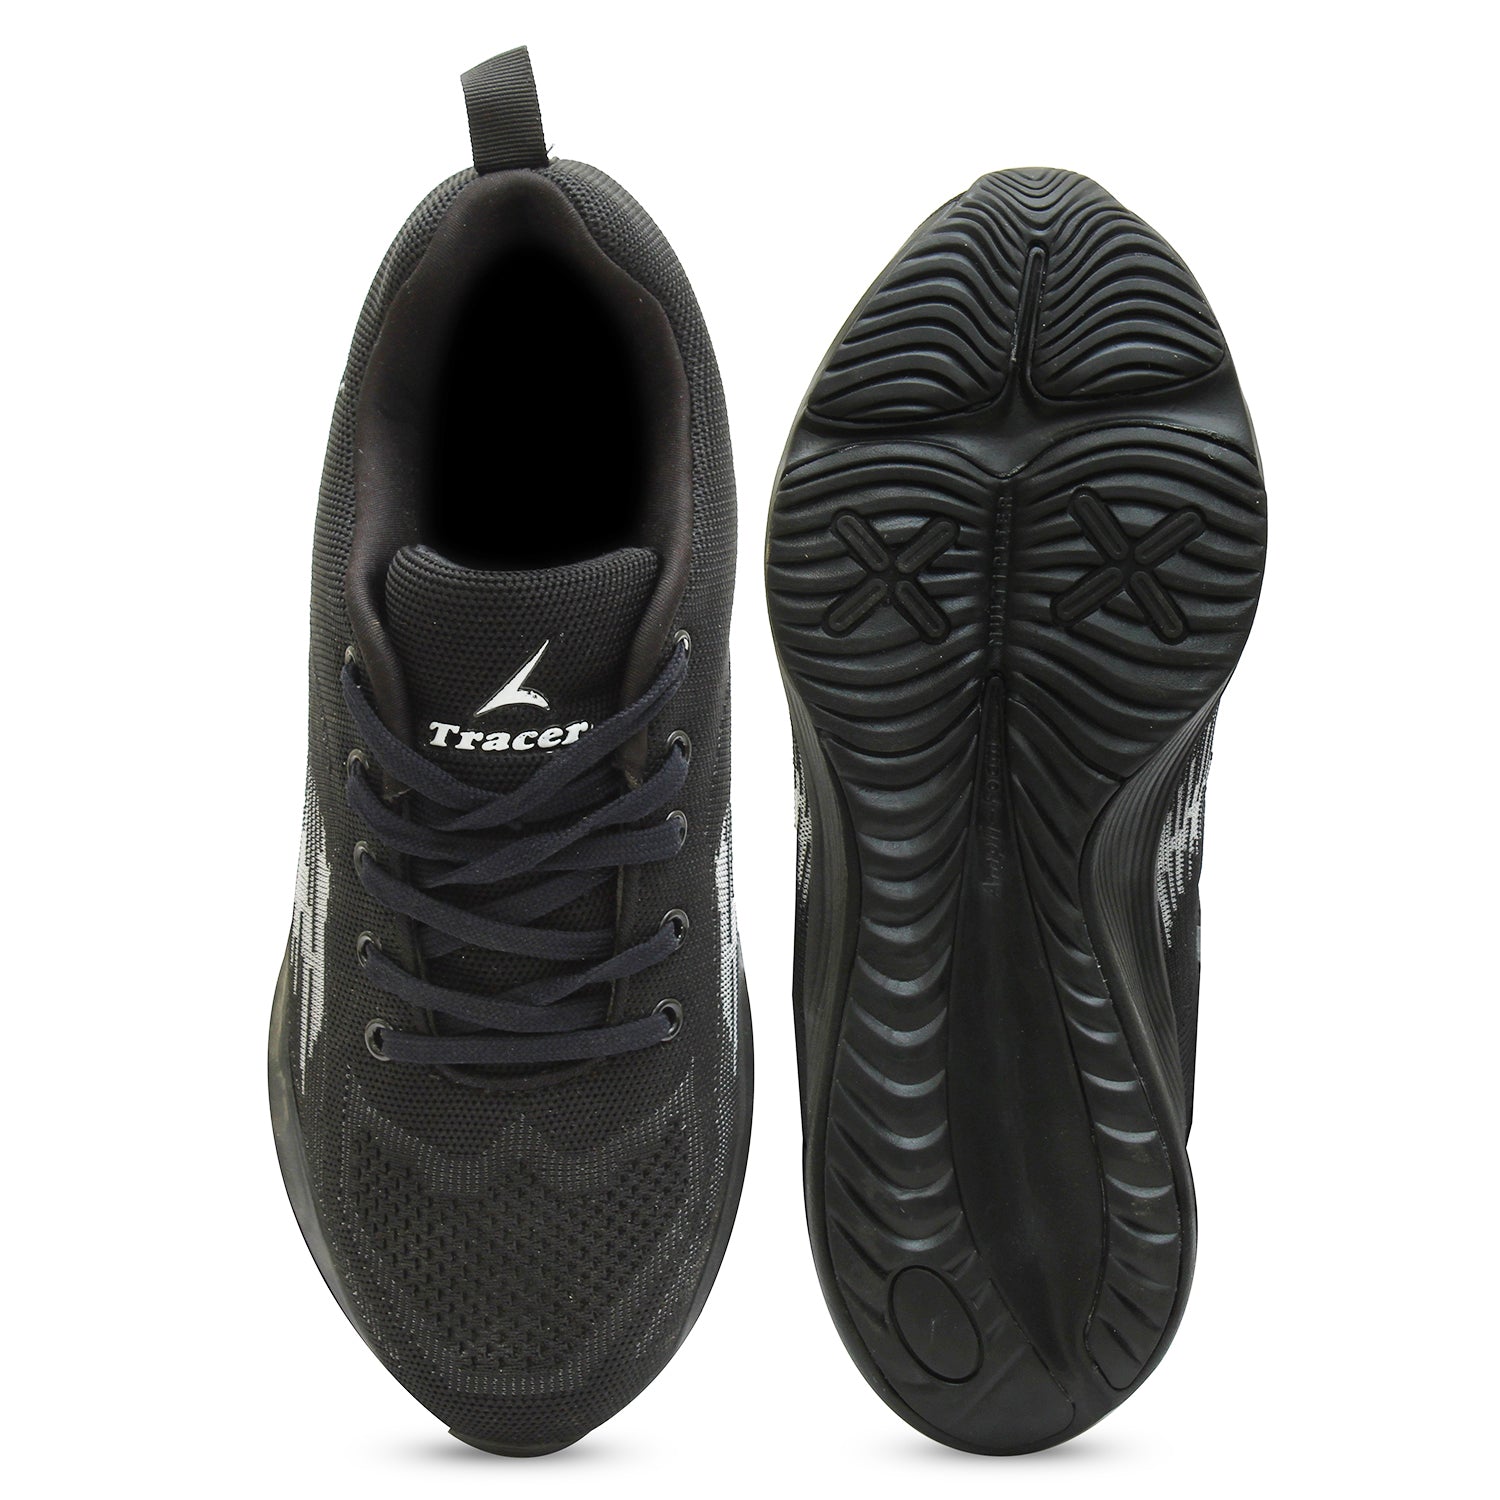 Shop Men's Running Shoes, Tracer India